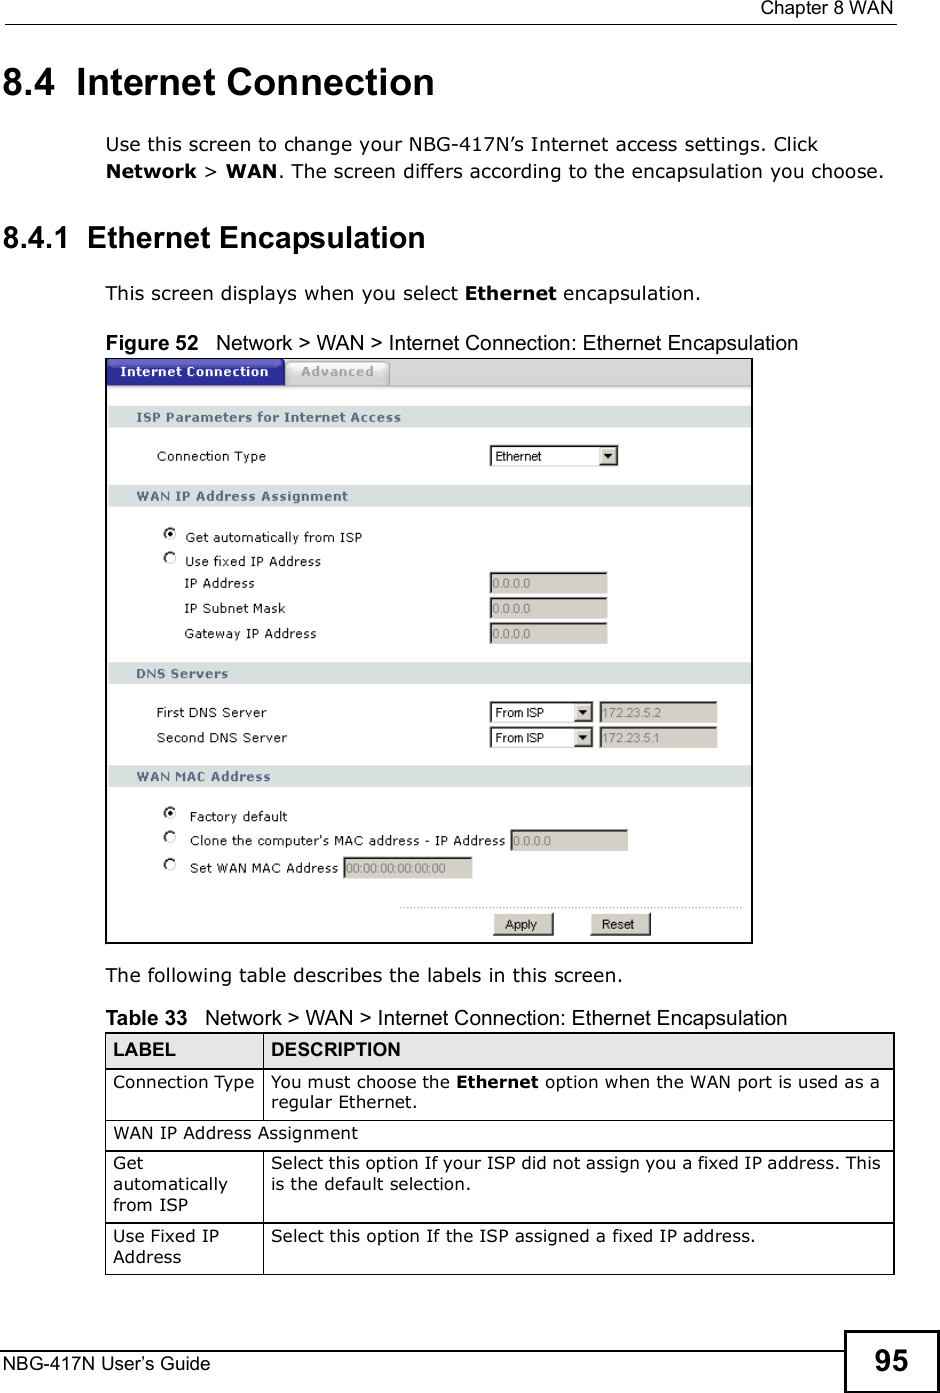  Chapter 8WANNBG-417N User s Guide 958.4  Internet ConnectionUse this screen to change your NBG-417N!s Internet access settings. Click Network &gt; WAN. The screen differs according to the encapsulation you choose.8.4.1  Ethernet EncapsulationThis screen displays when you select Ethernet encapsulation.Figure 52   Network &gt; WAN &gt; Internet Connection: Ethernet EncapsulationThe following table describes the labels in this screen.Table 33   Network &gt; WAN &gt; Internet Connection: Ethernet EncapsulationLABEL DESCRIPTIONConnection Type You must choose the Ethernet option when the WAN port is used as a regular Ethernet.WAN IP Address Assignment Get automatically from ISP Select this option If your ISP did not assign you a fixed IP address. This is the default selection. Use Fixed IP AddressSelect this option If the ISP assigned a fixed IP address. 